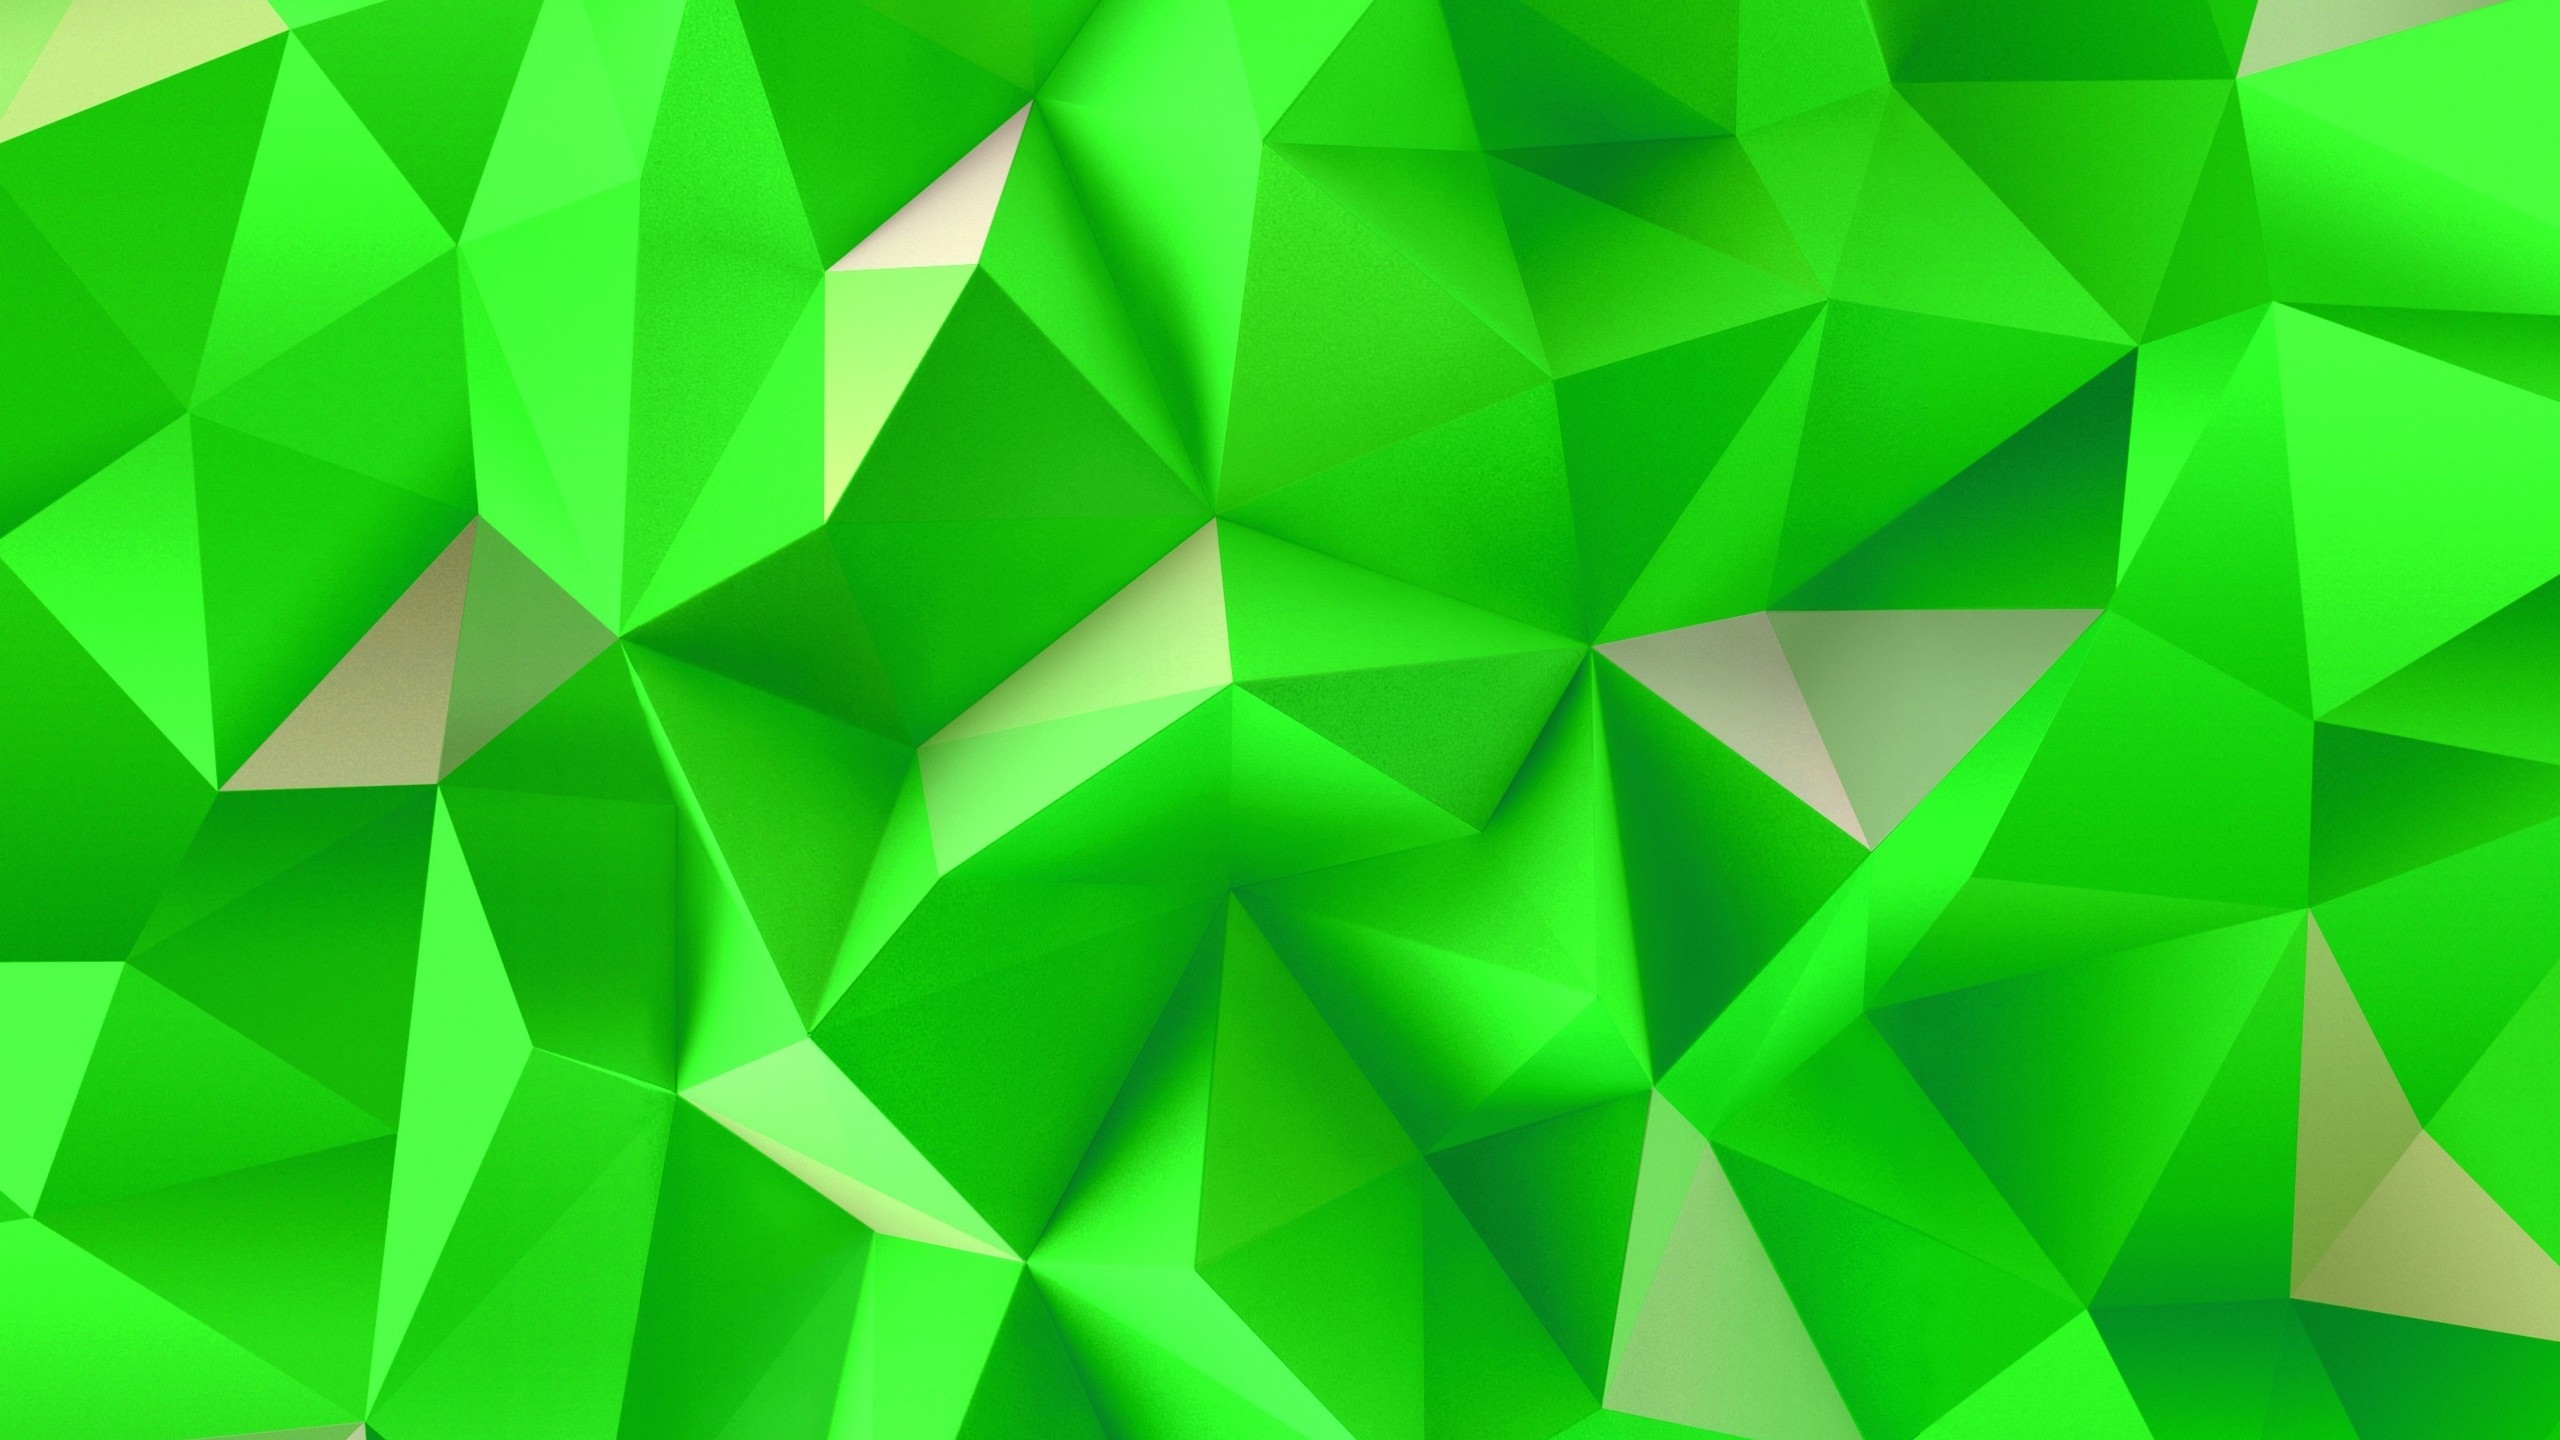 Green Triangles for 2560x1440 HDTV resolution